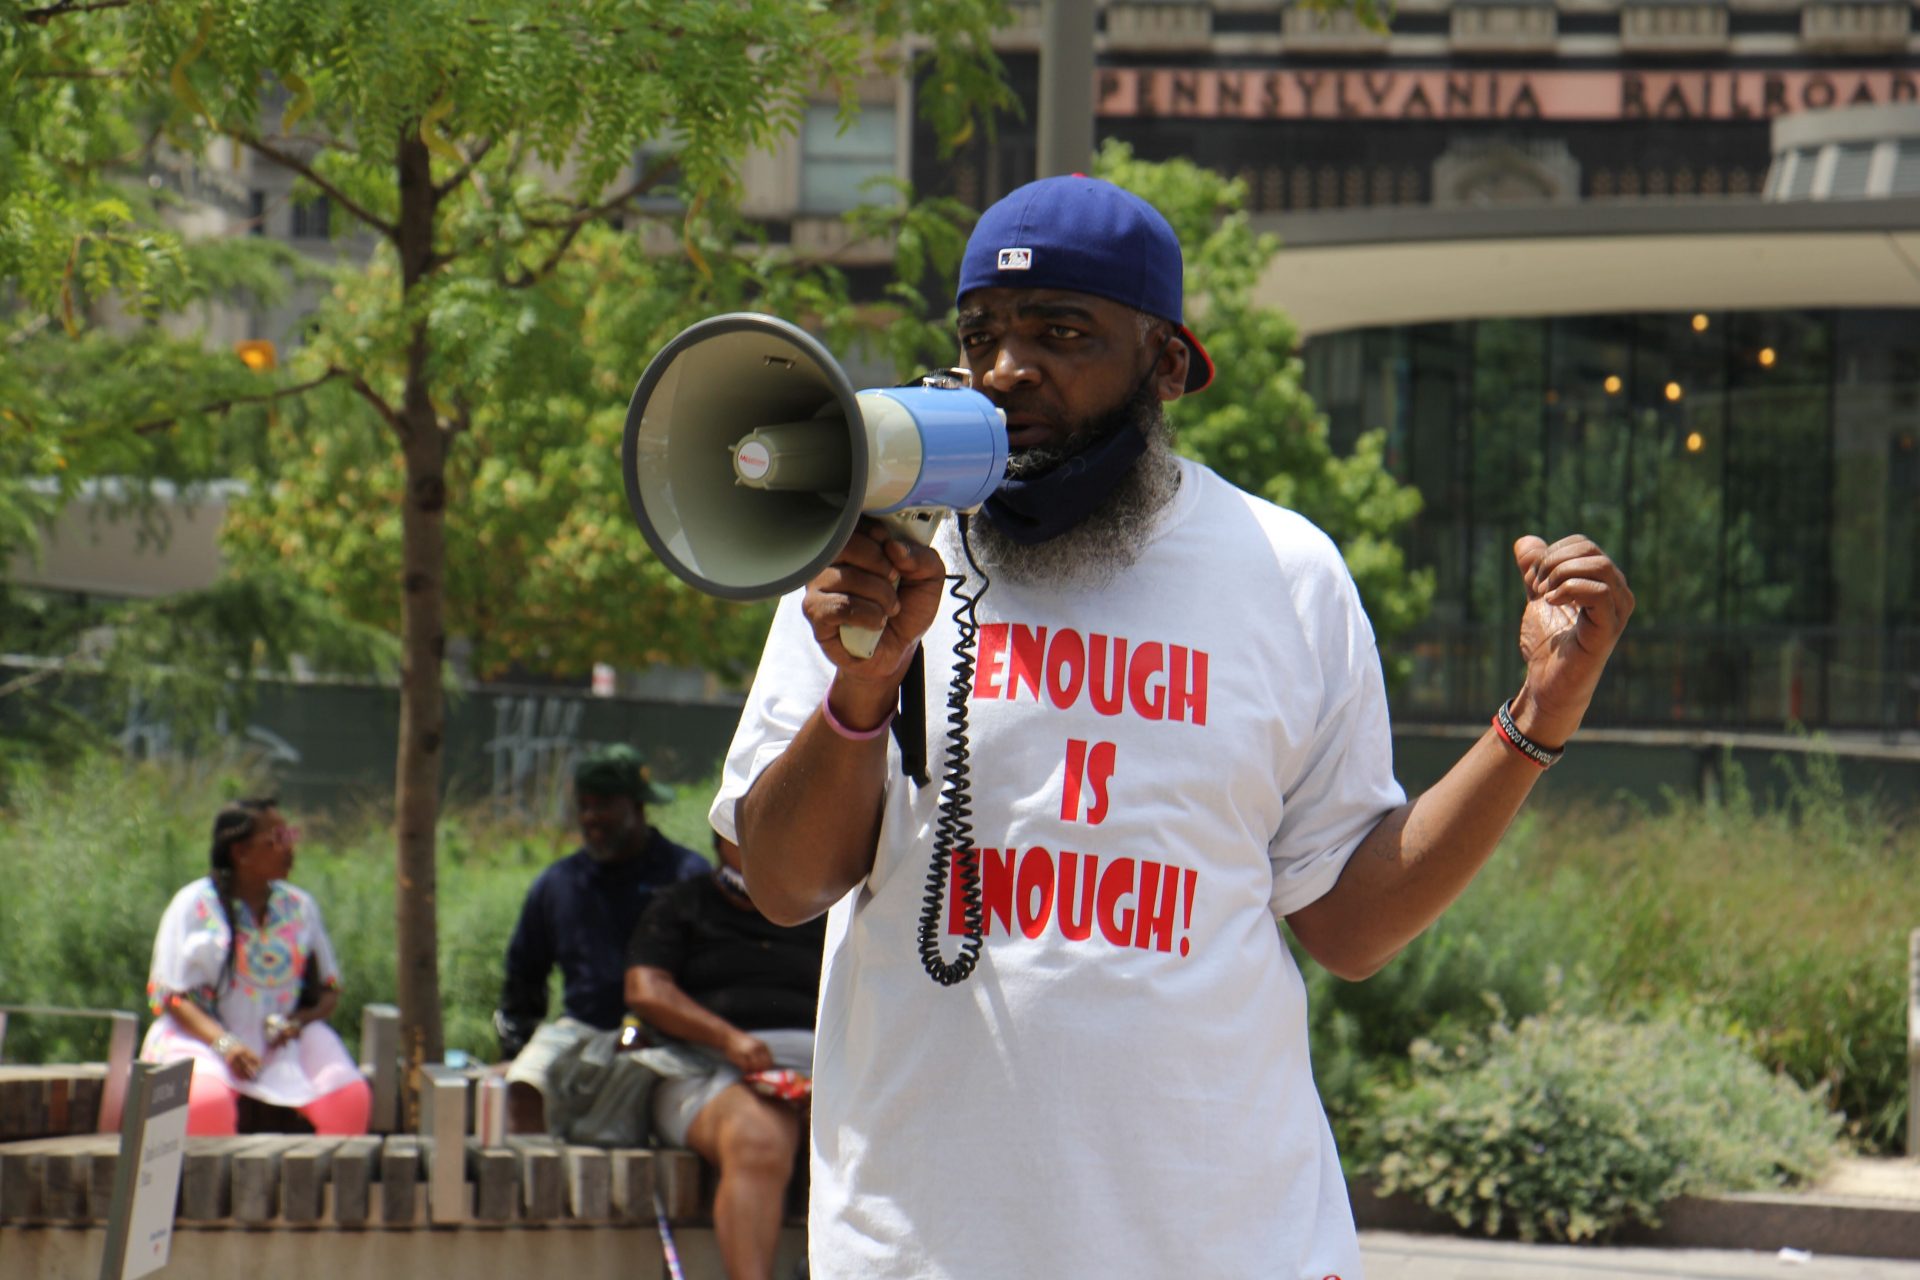 Activist Ikey Raw launches a rally against gun violence at Love Park.